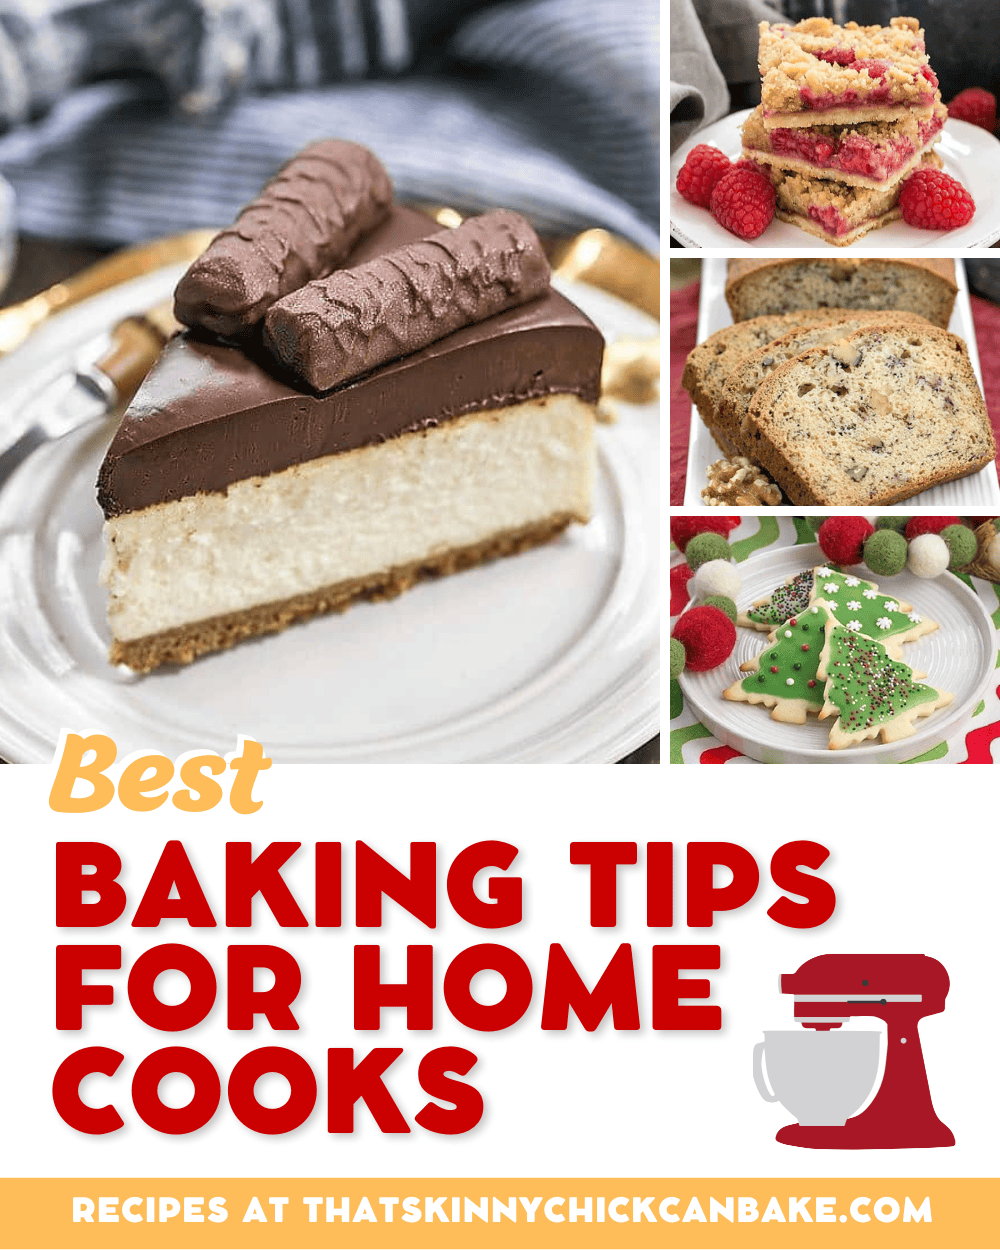 Best Baking Tips collage with 4 photos above a text box.